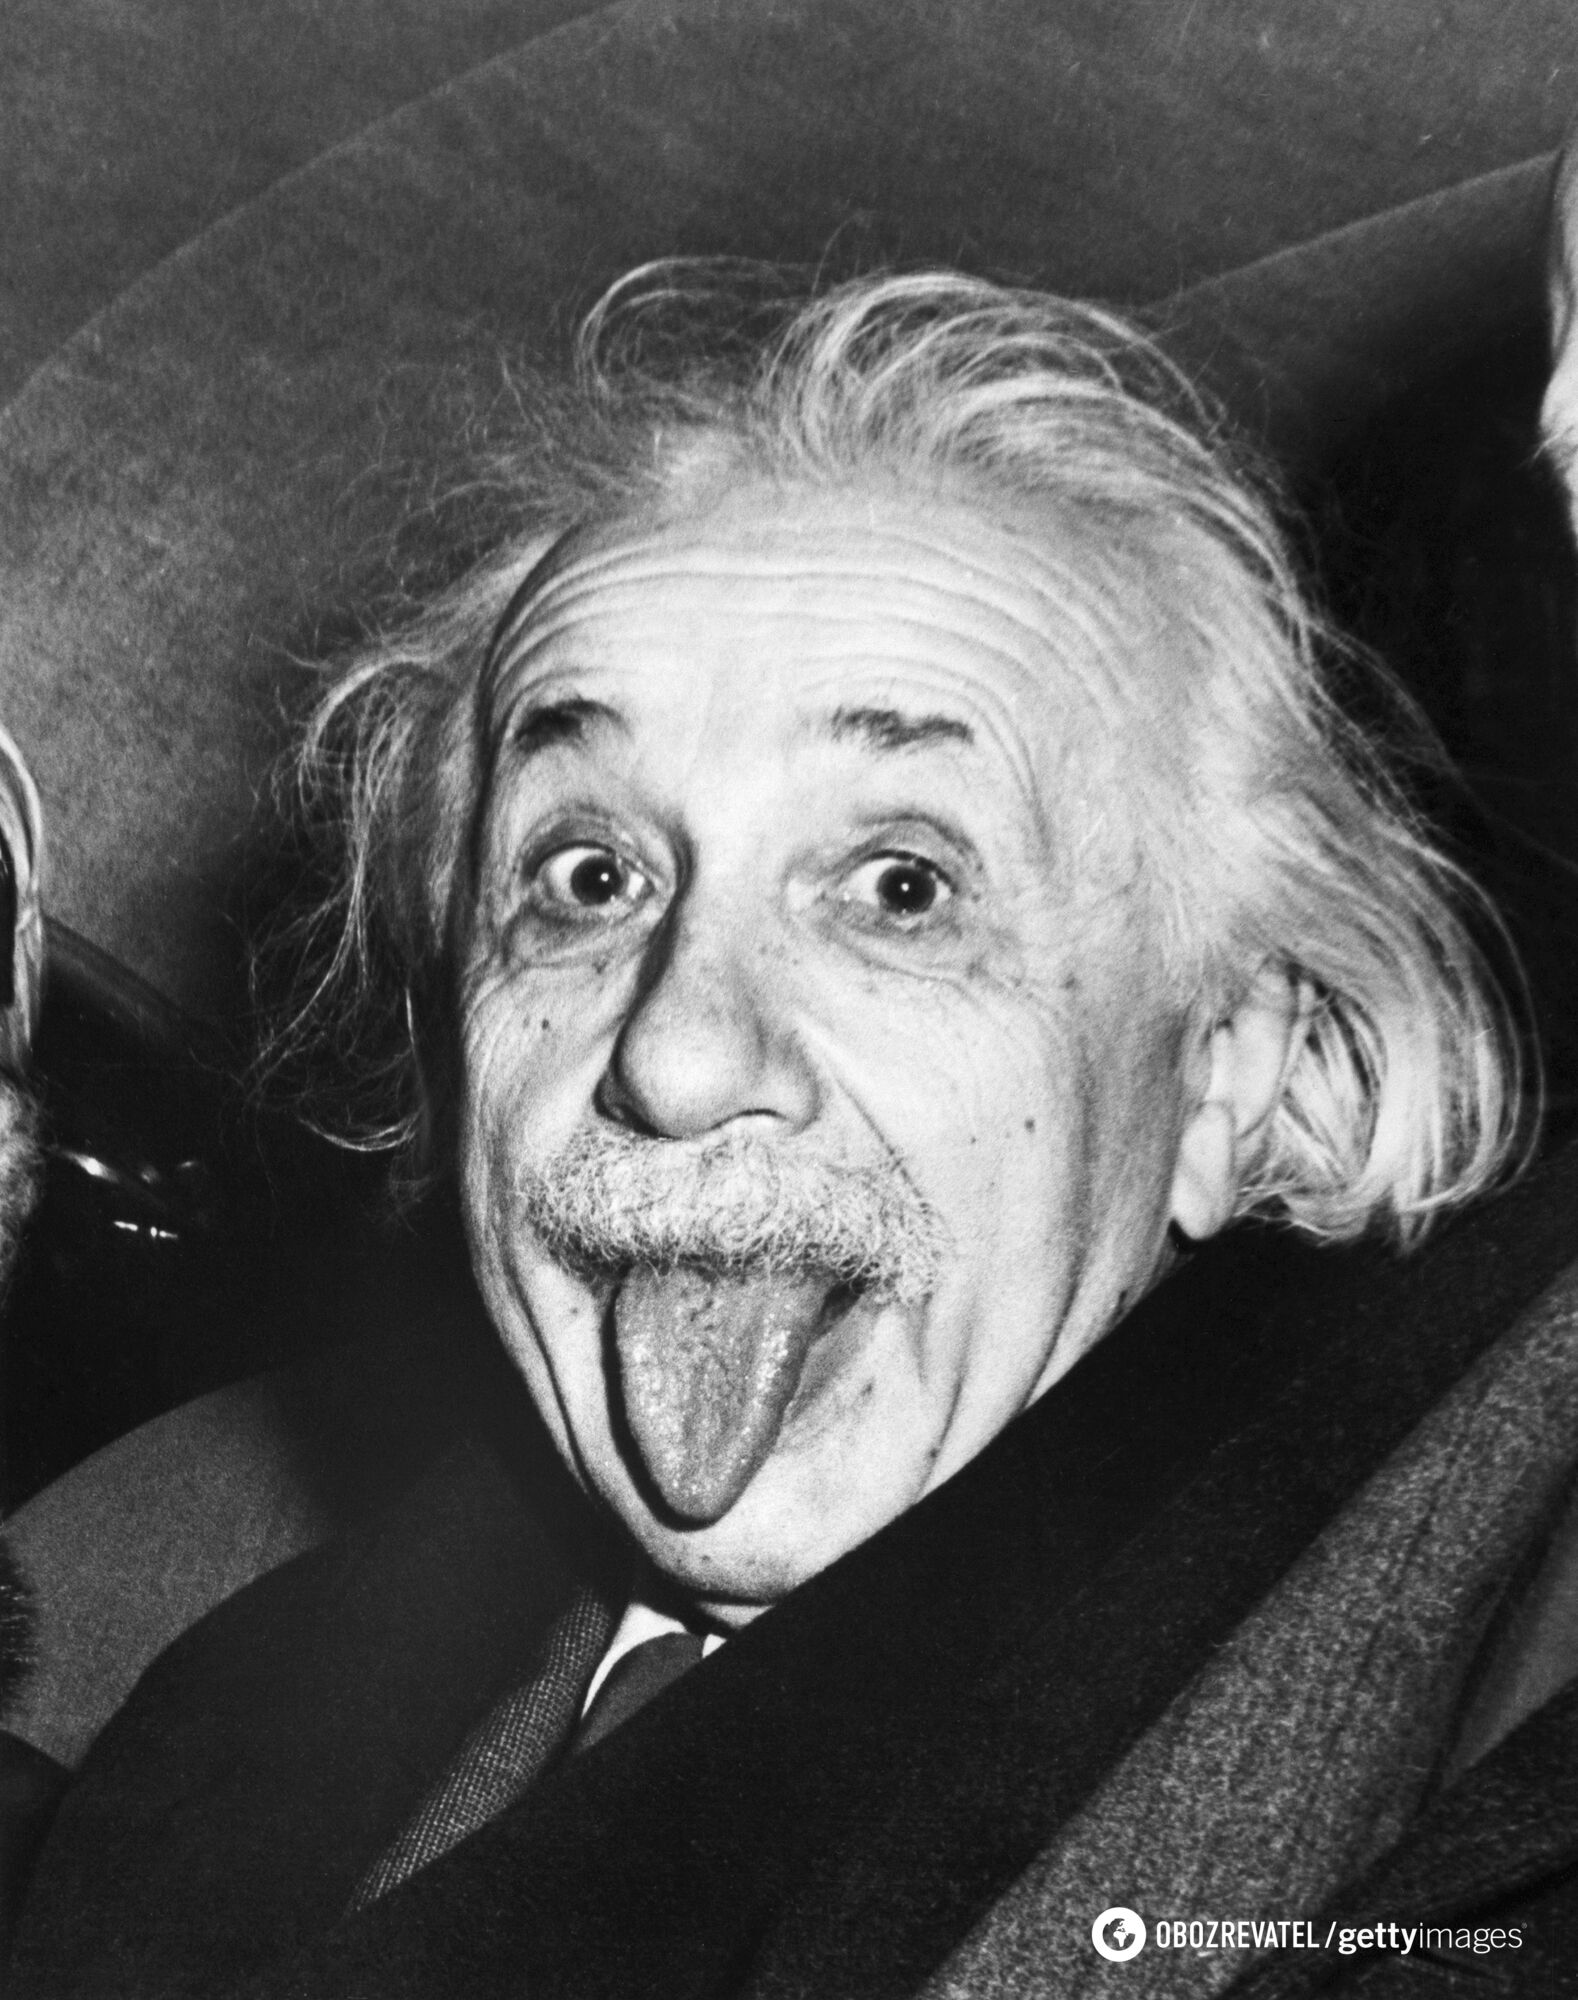 ''Never argue with idiots'': 10 quotes falsely attributed to Mark Twain and other celebrities